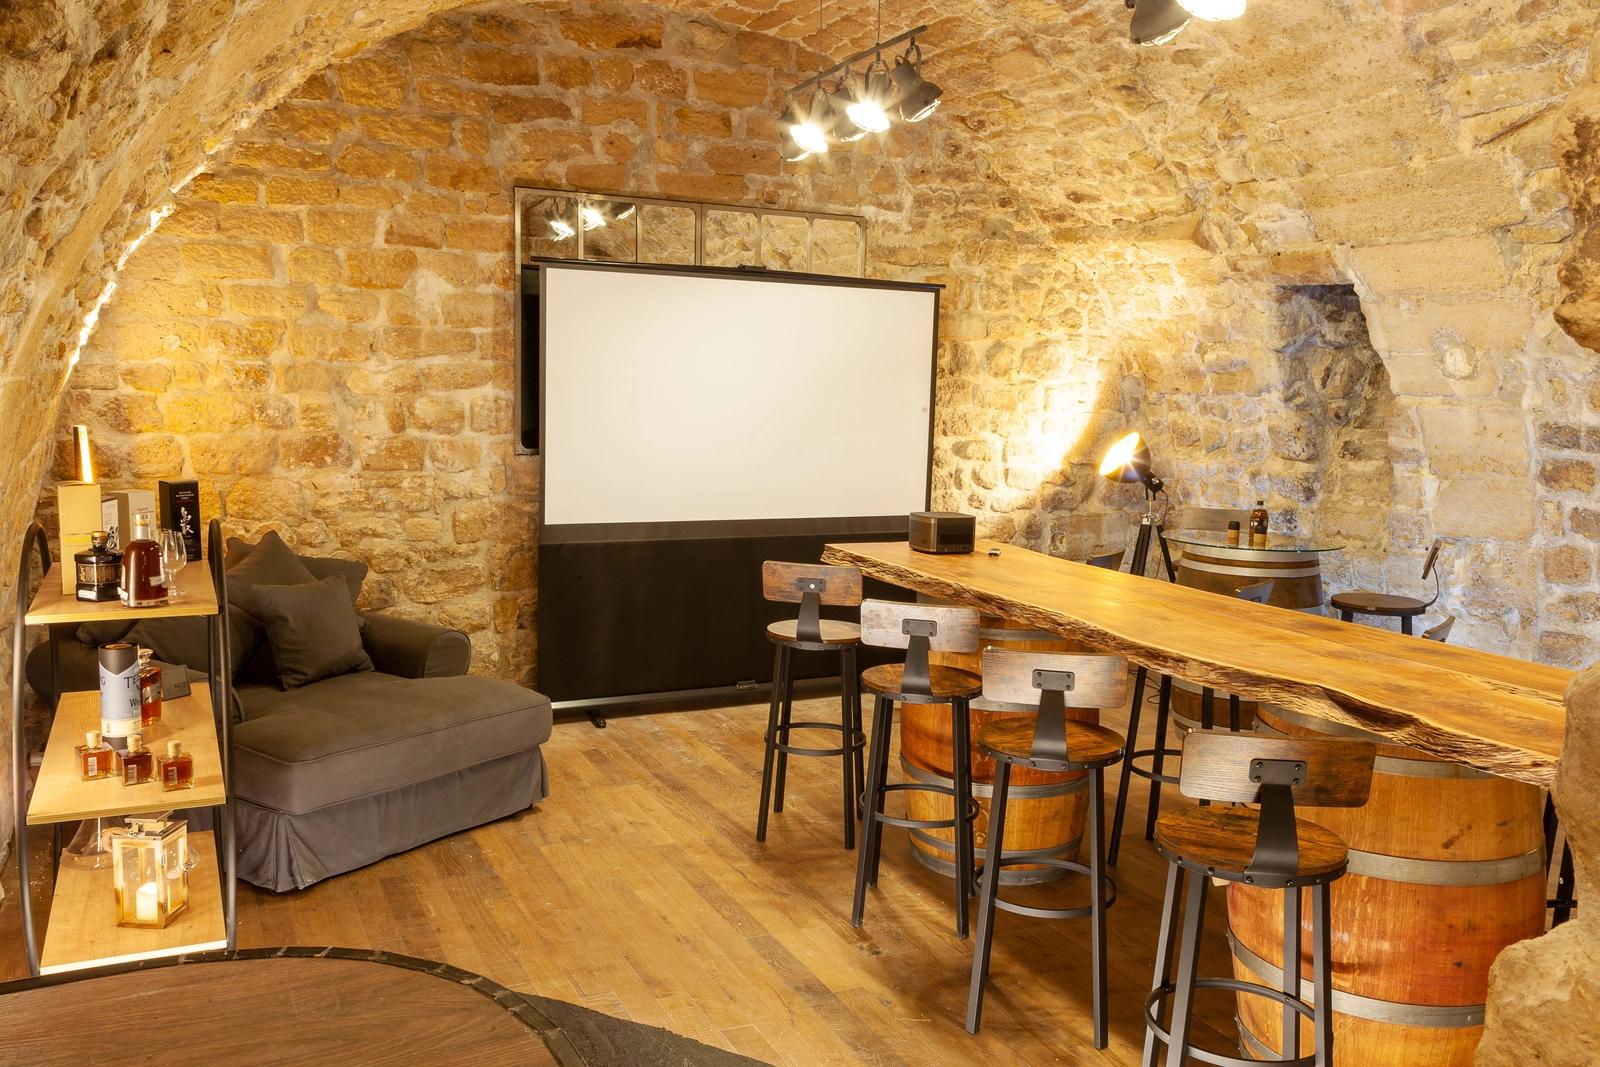 Vaulted cellars in the heart of historic Paris